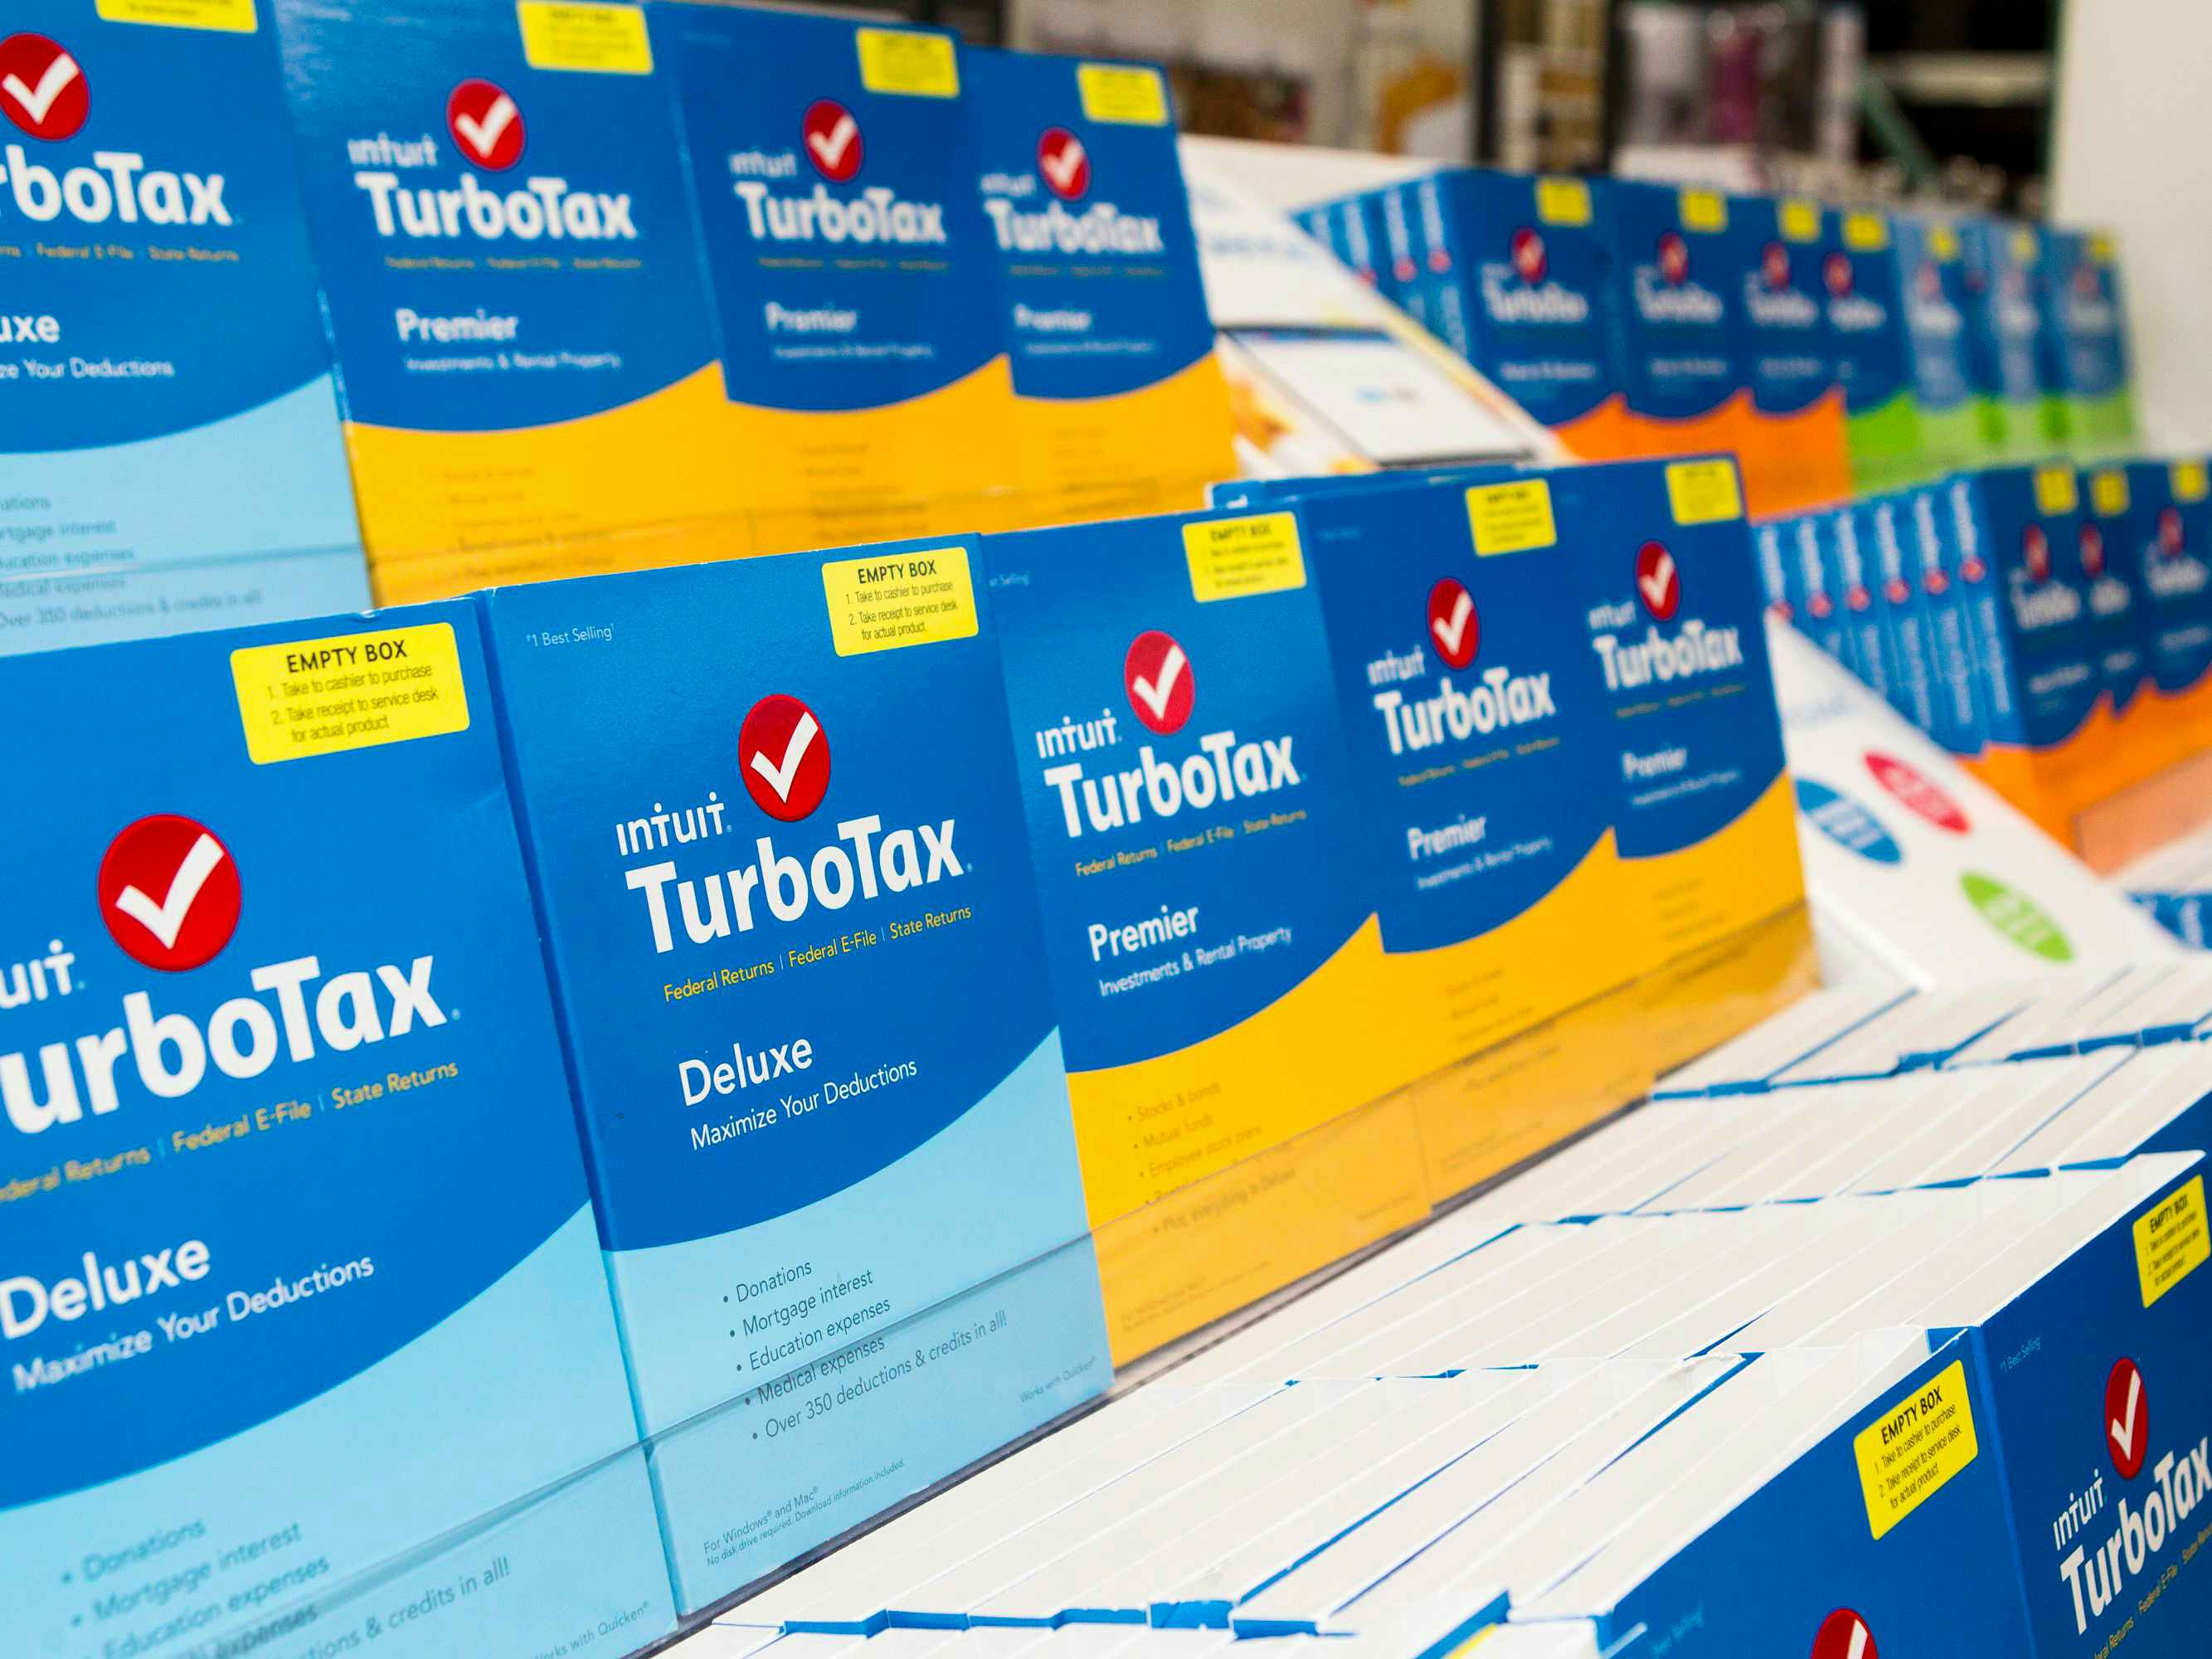 Boxes of TurboTax Deluxe and Premier software on display inside a store.